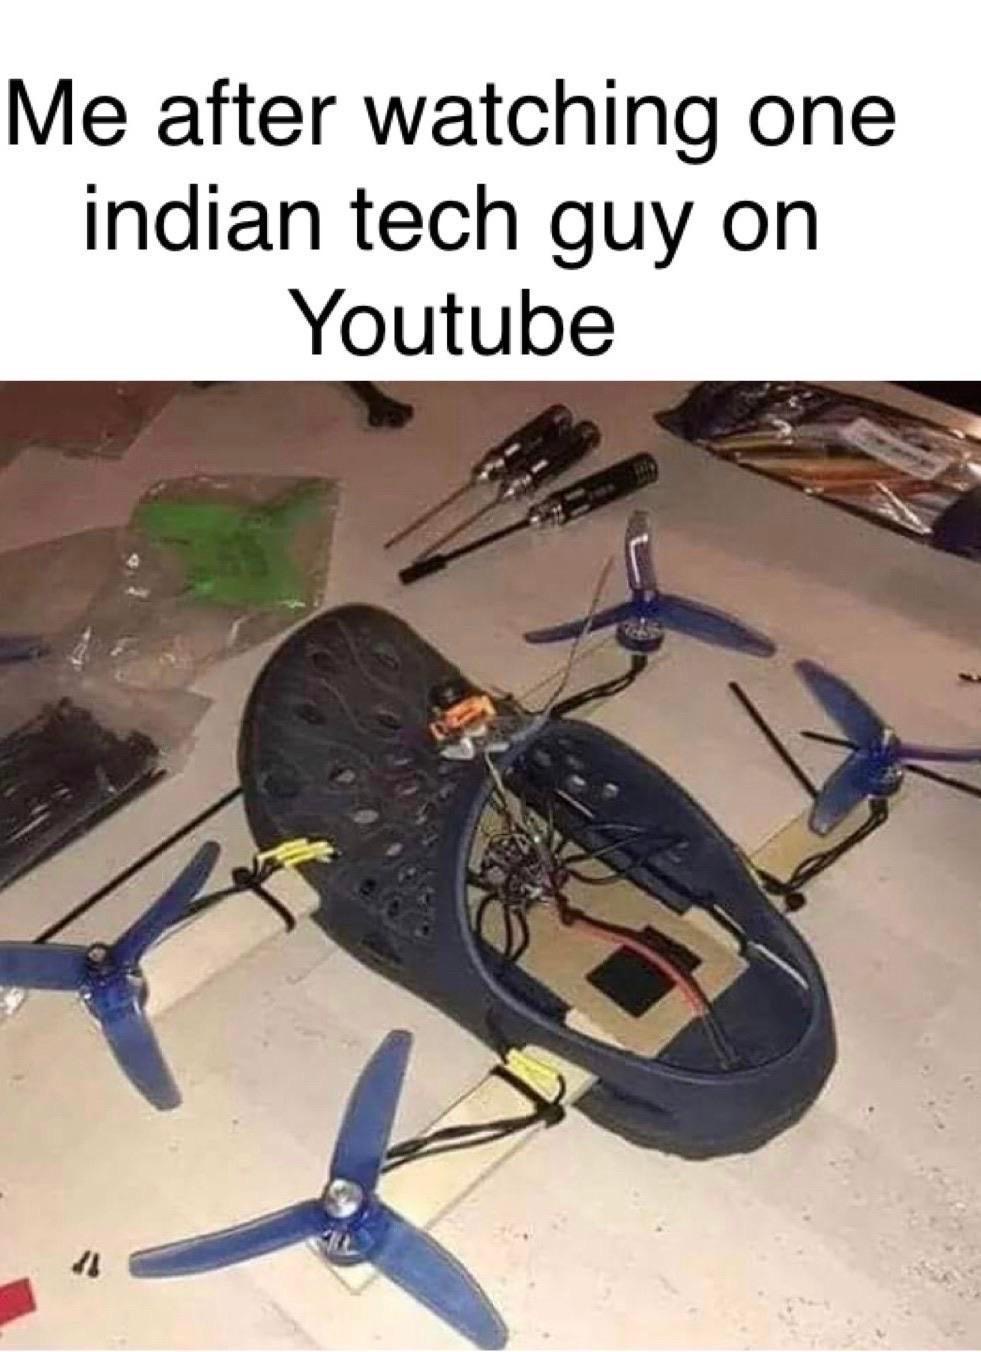 indian tech guy - Me after watching one indian tech guy on Youtube